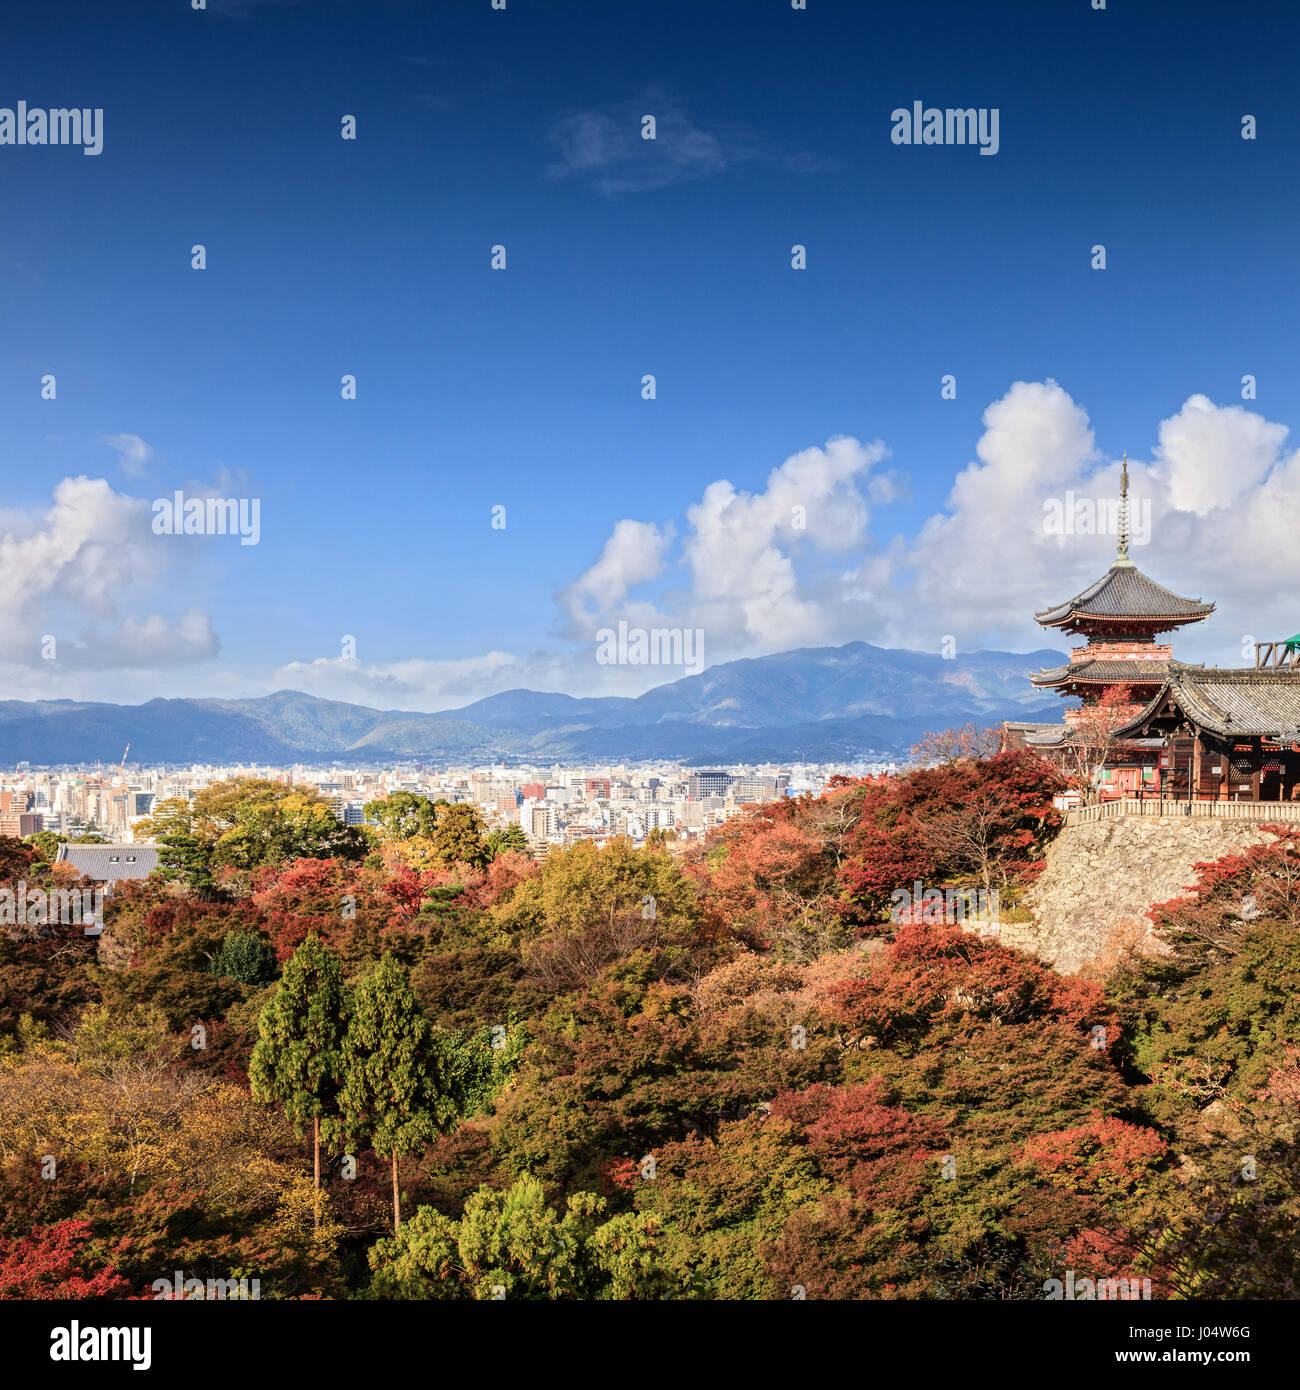 Kyoto, Kiyomizu-dera Temple, Japan - the most visited temple in Kyoto, Japan, this is  Kiyomizu-dera and its gardens in autumn colour, with the city o Stock Photo